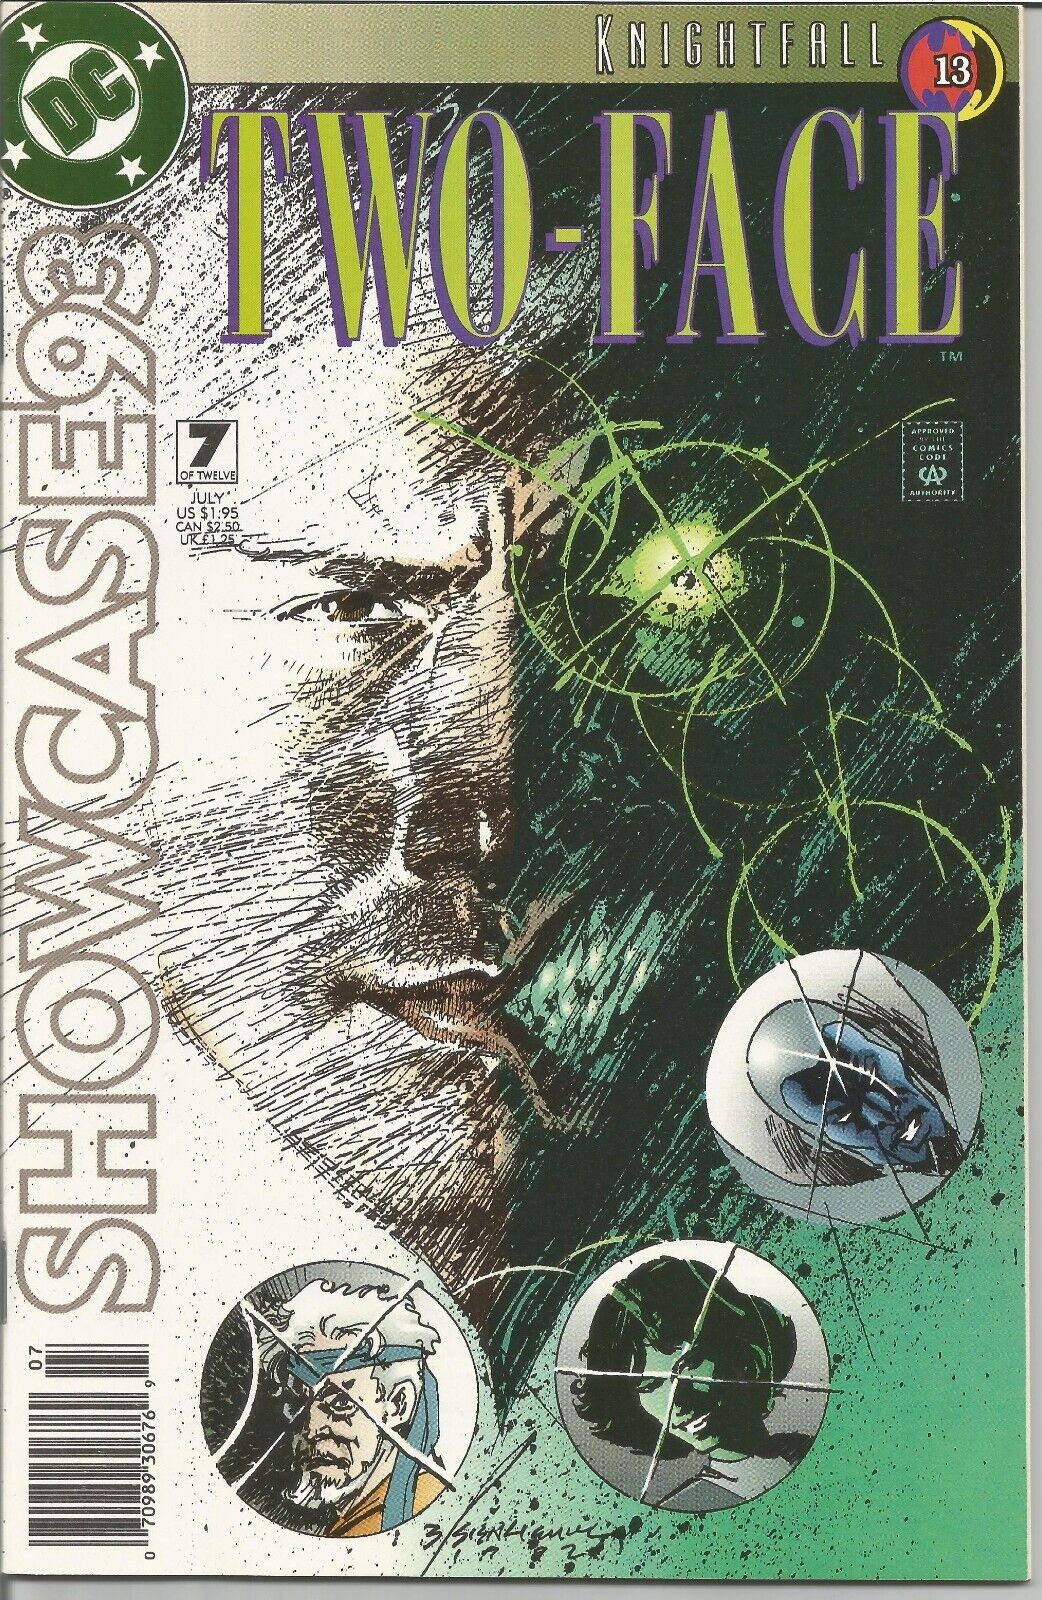 Showcase '93 Two-Face #7 1993 - Bill Sienkiewicz Cover  NM